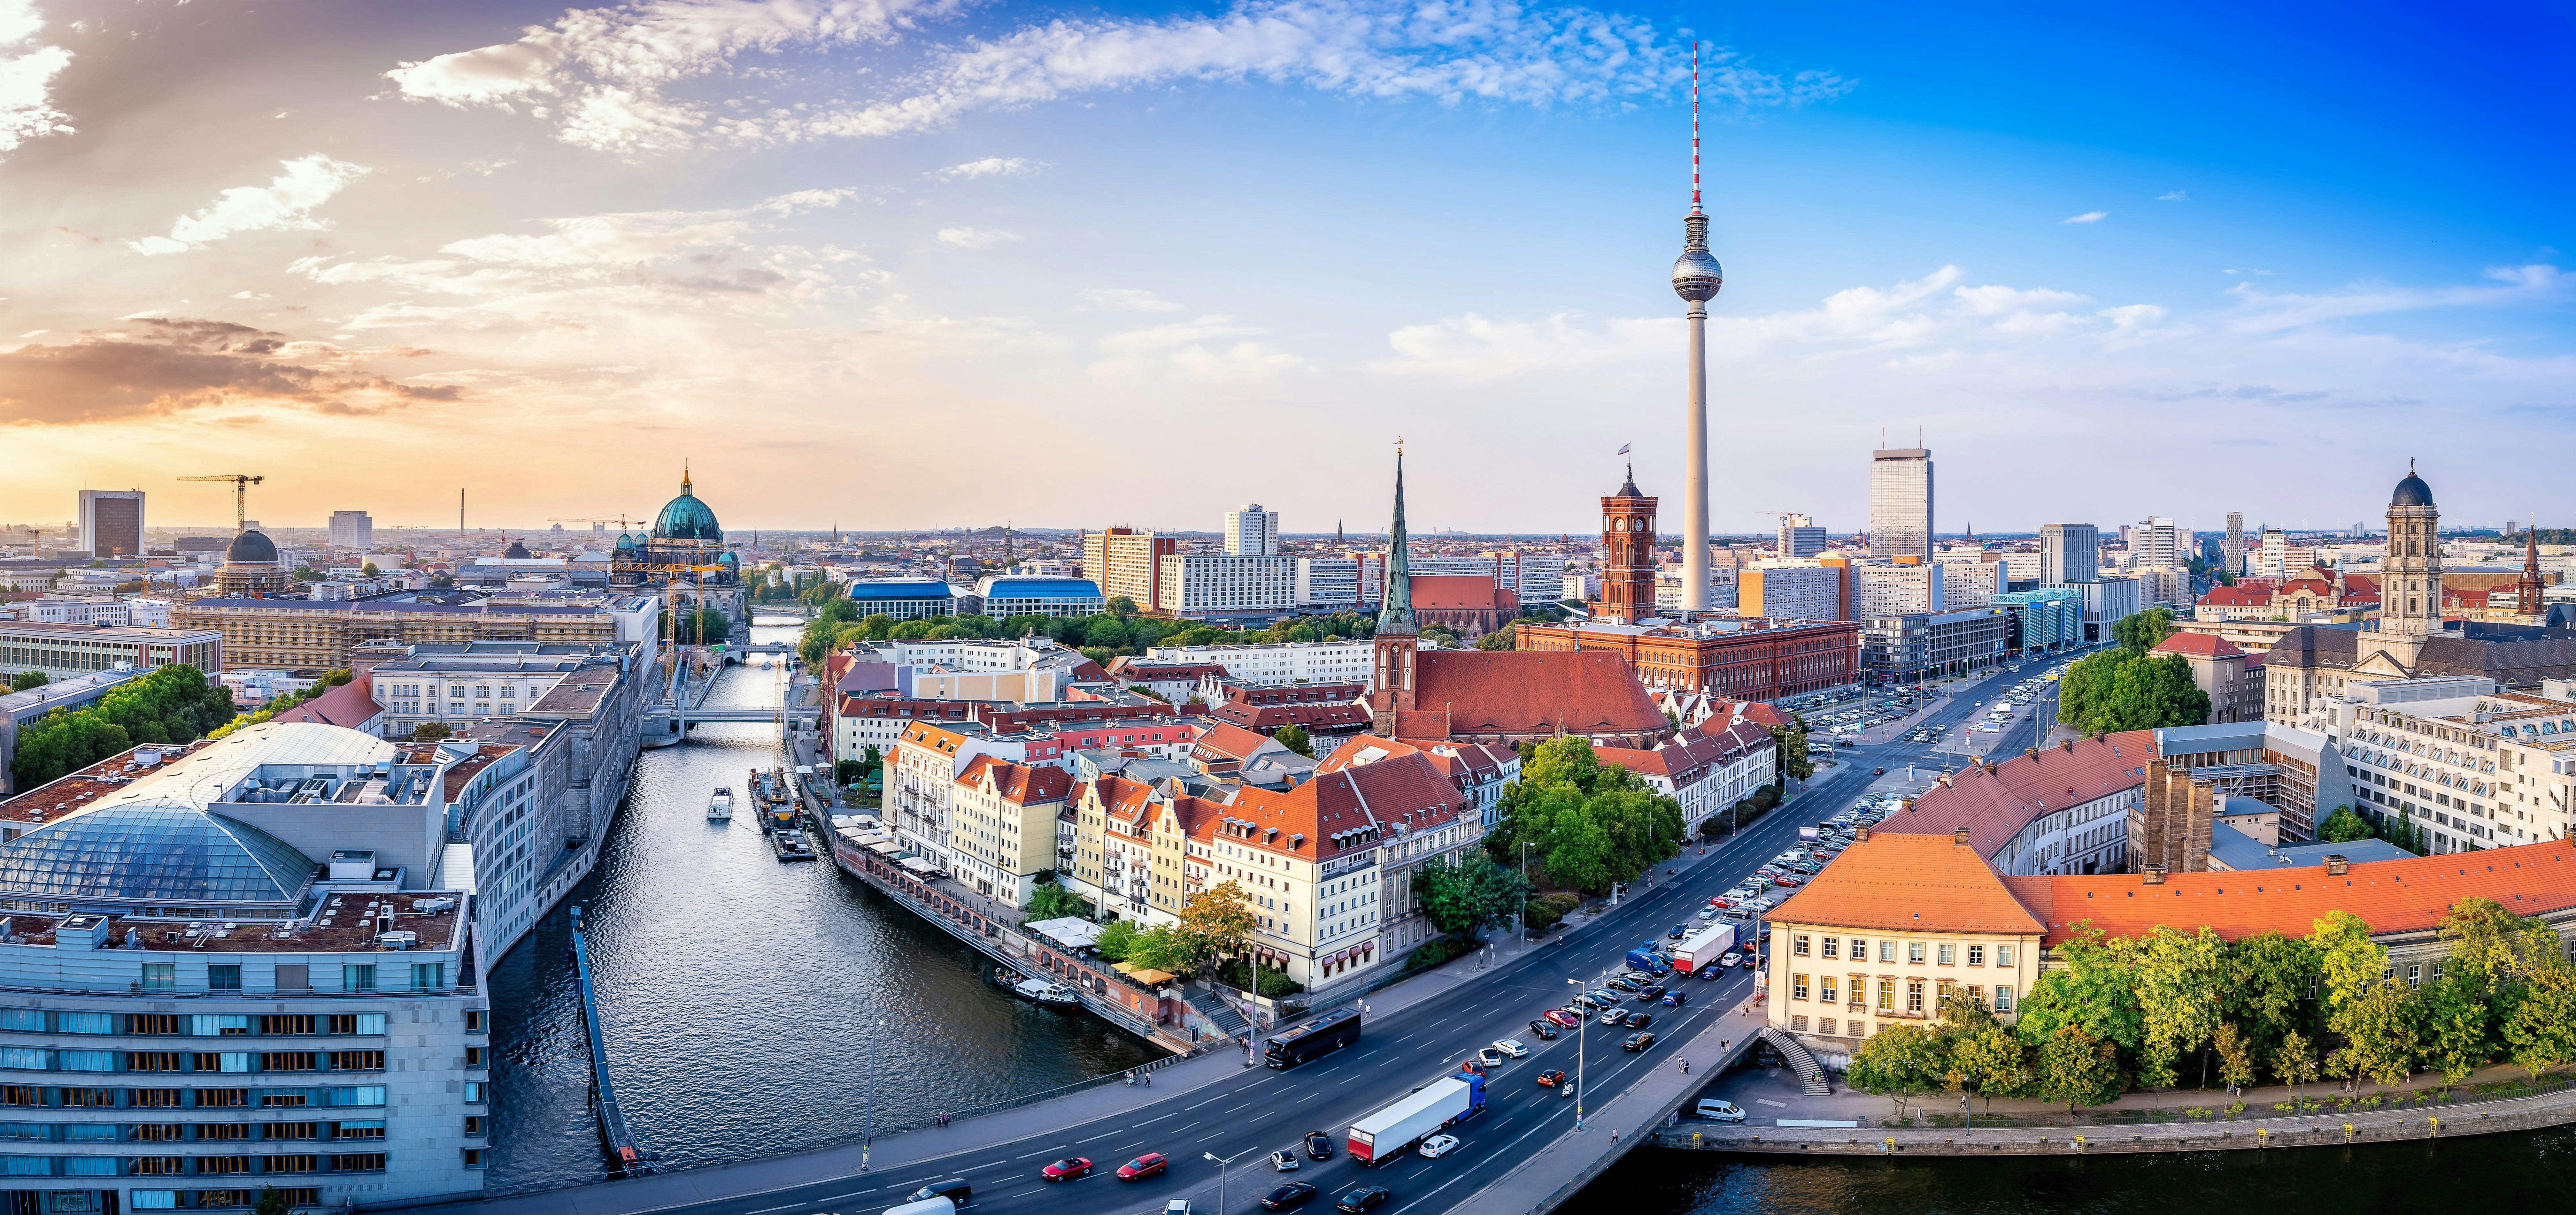 Berlin sightseeing tour of the top 20 attractions